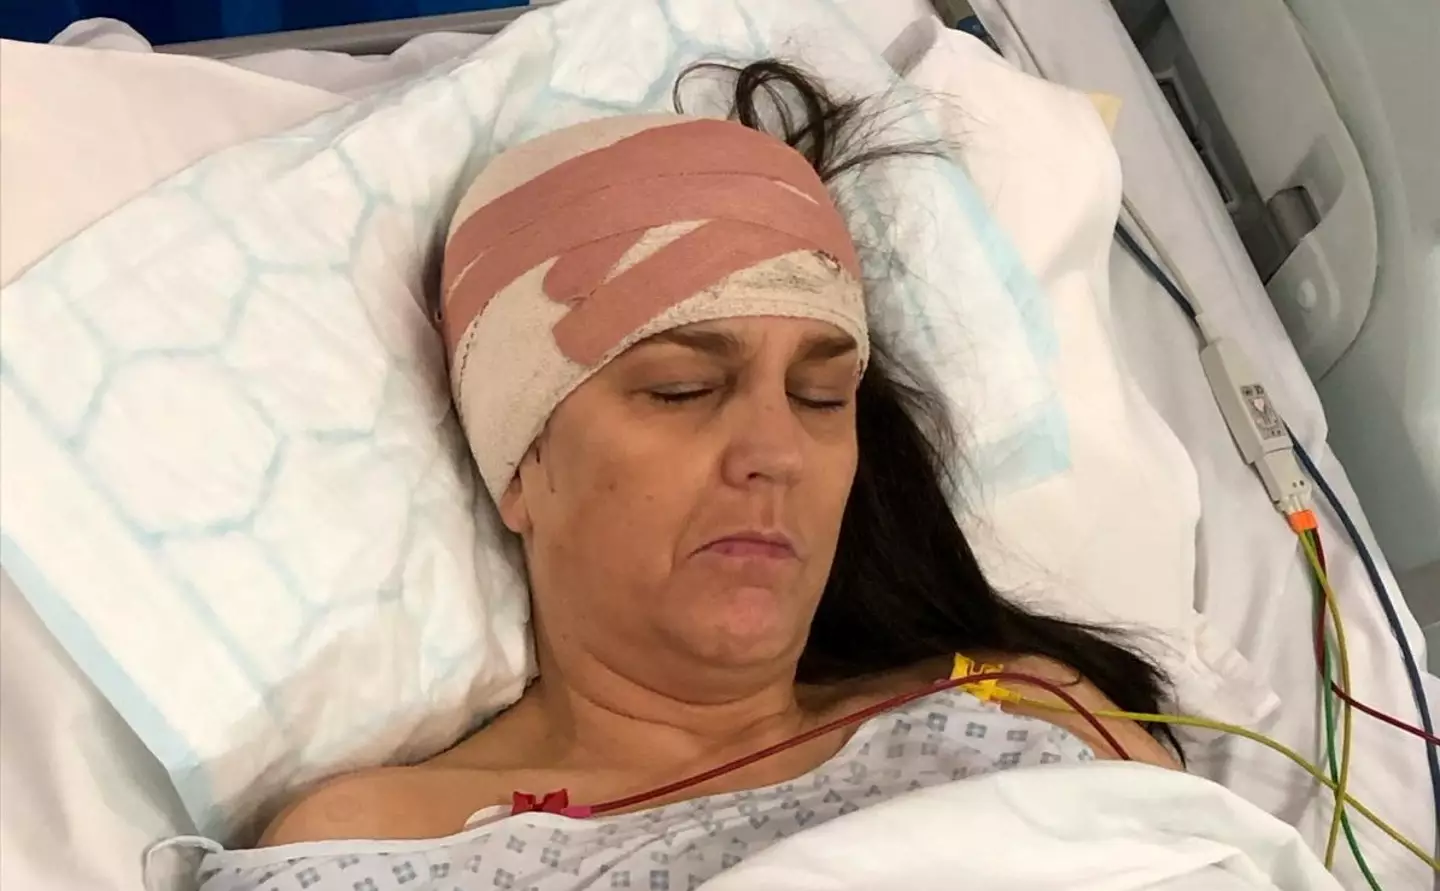 Denise Wingfield was diagnosed with the rare brain tumour after an MRI scan. (SWNS)